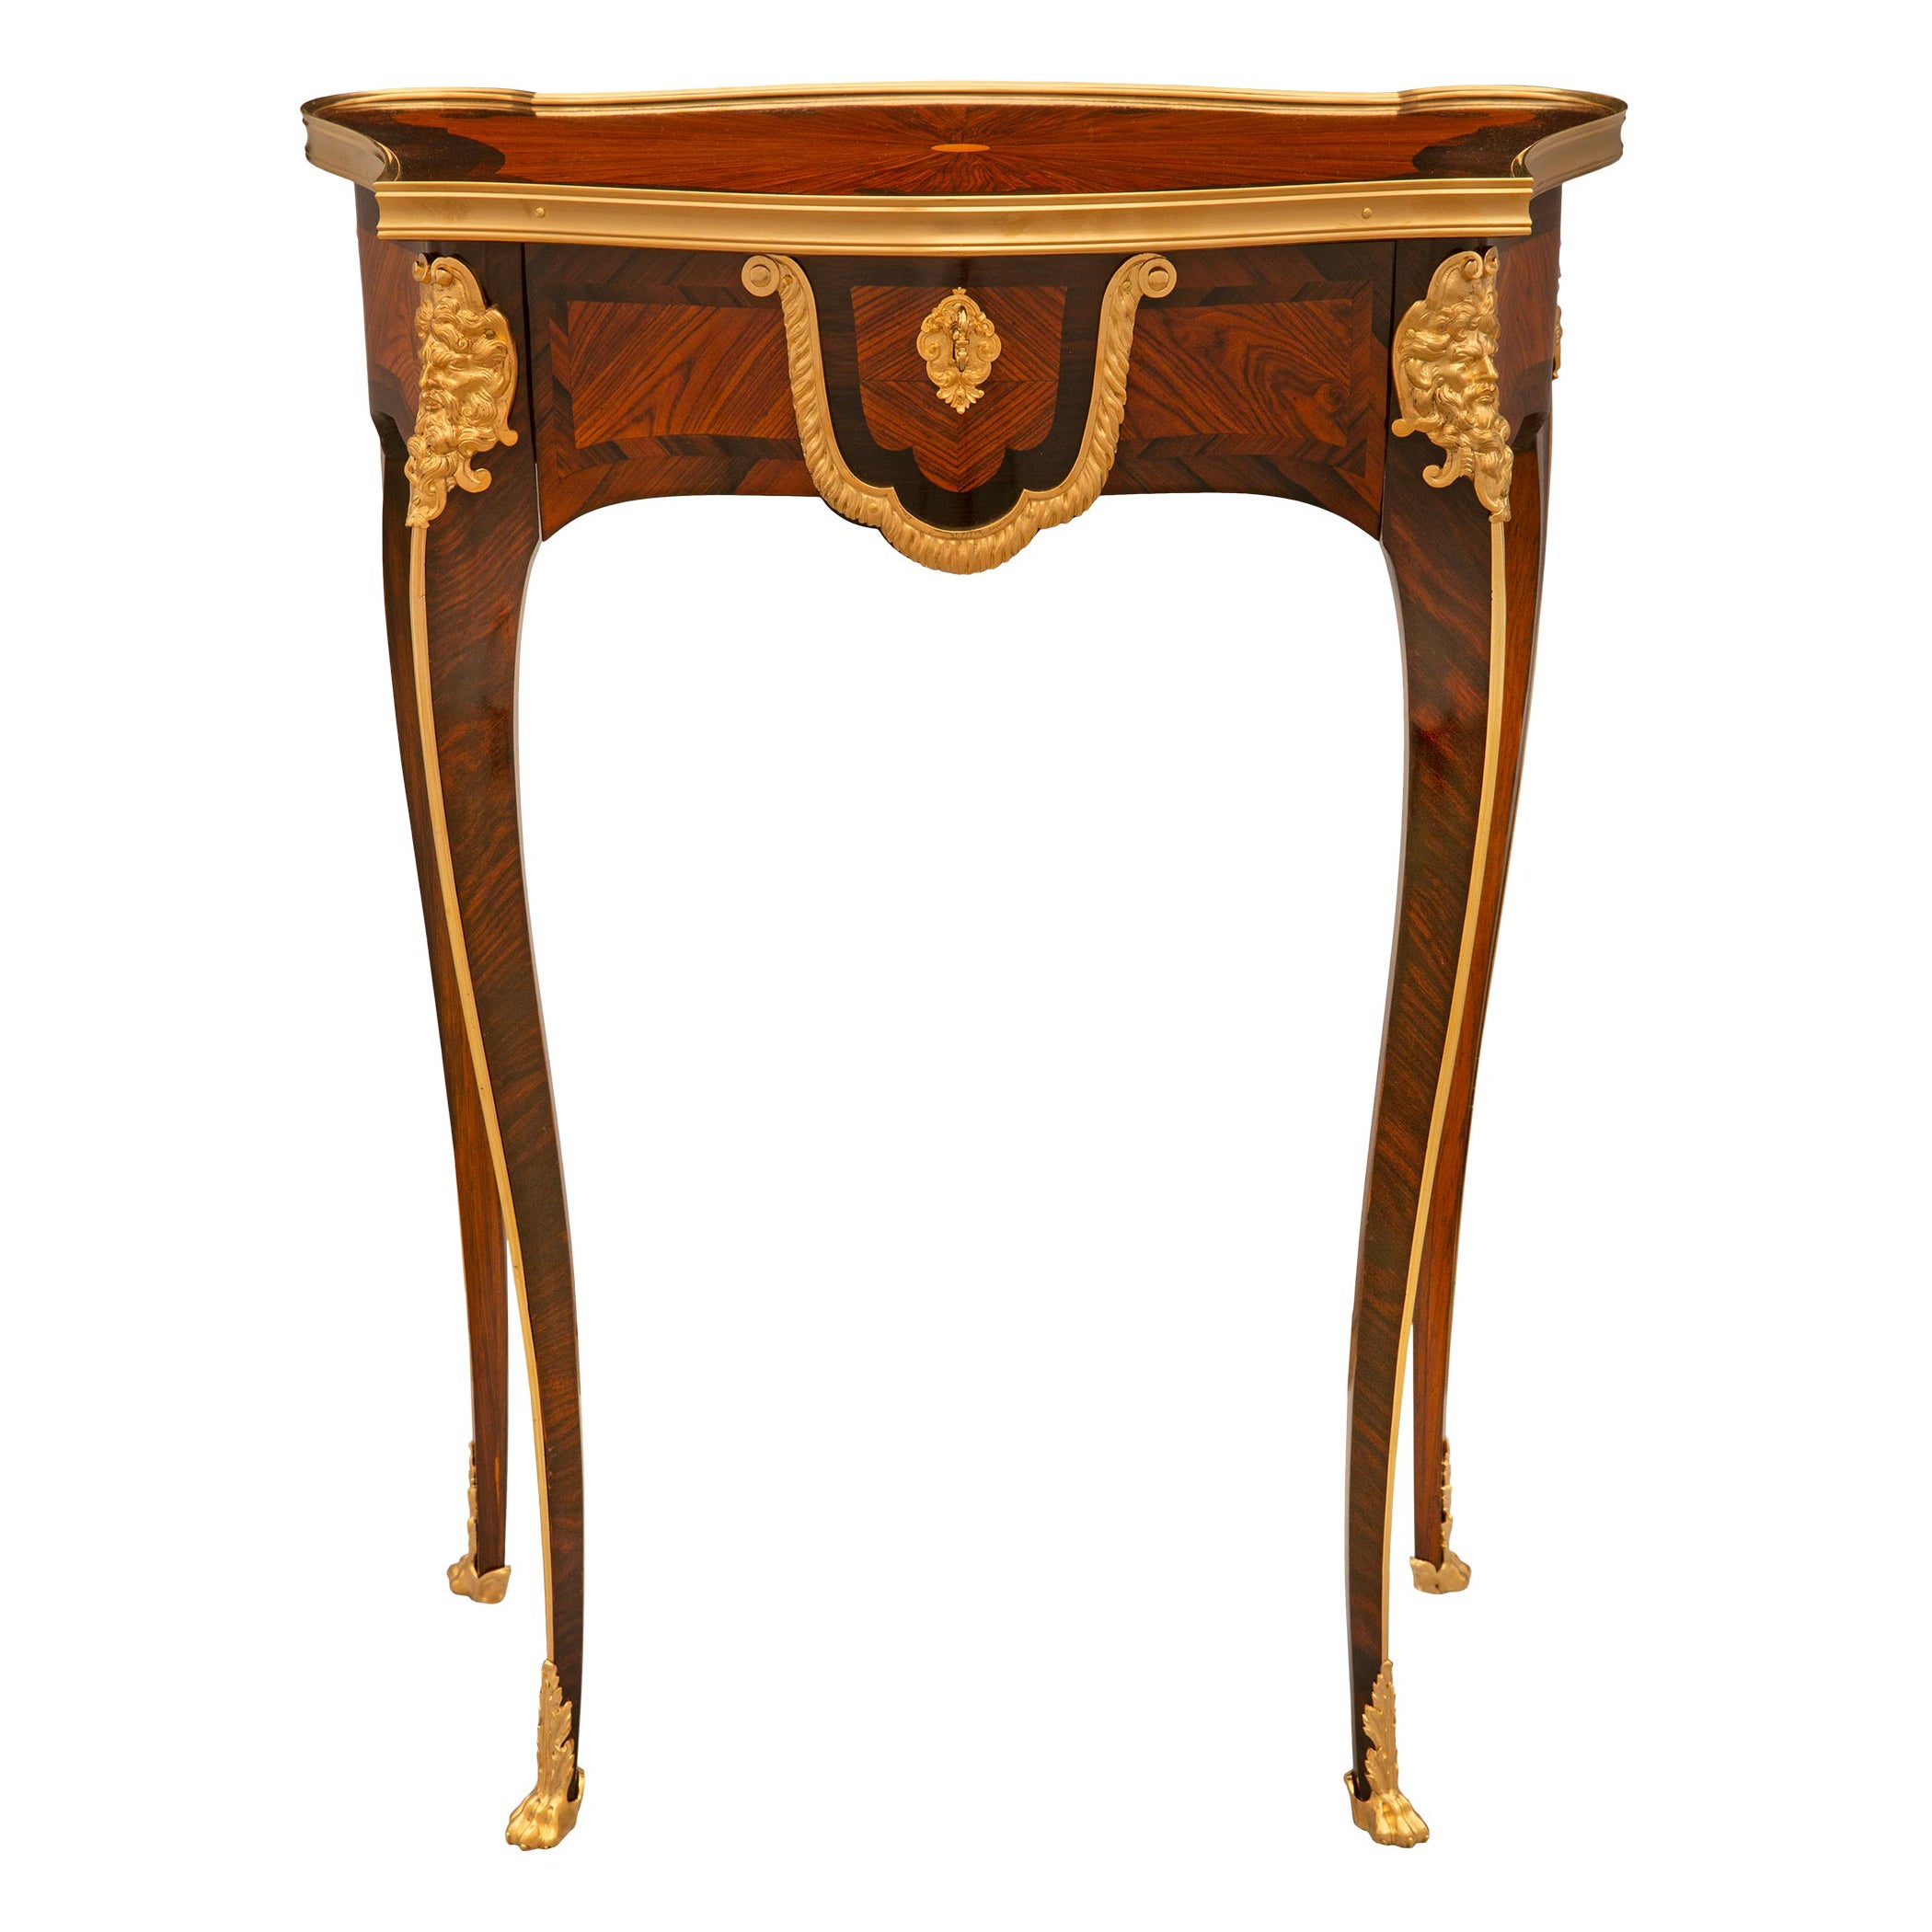 French 19th Century Belle Epoque Period Tulipwood, Kingwood & Ormolu Side Table For Sale